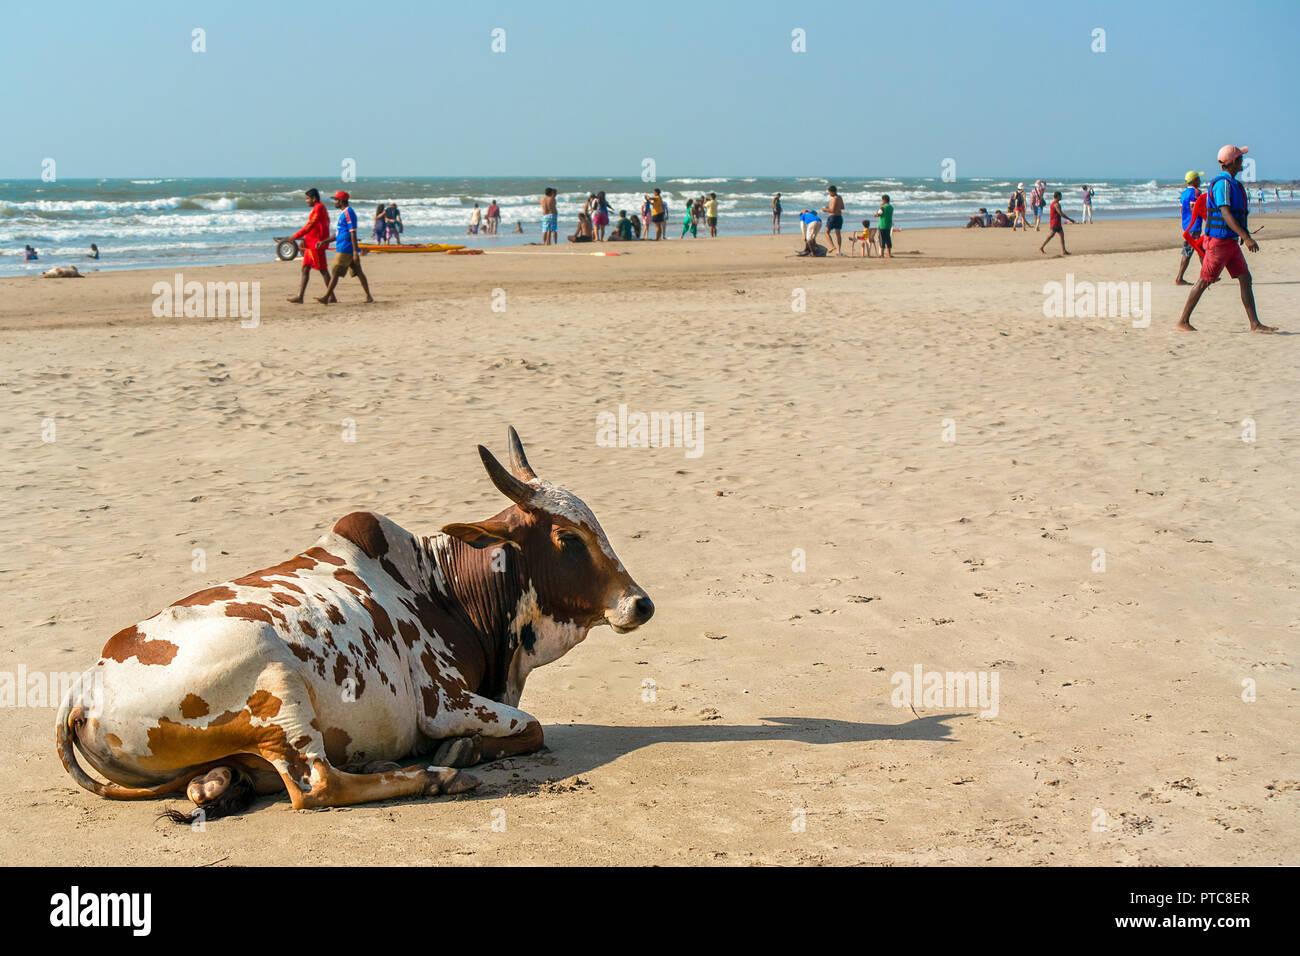 A Indian sacred white and brown spotted cow casually rests on a busy popular sandy beach in Goa, India. Stock Photo